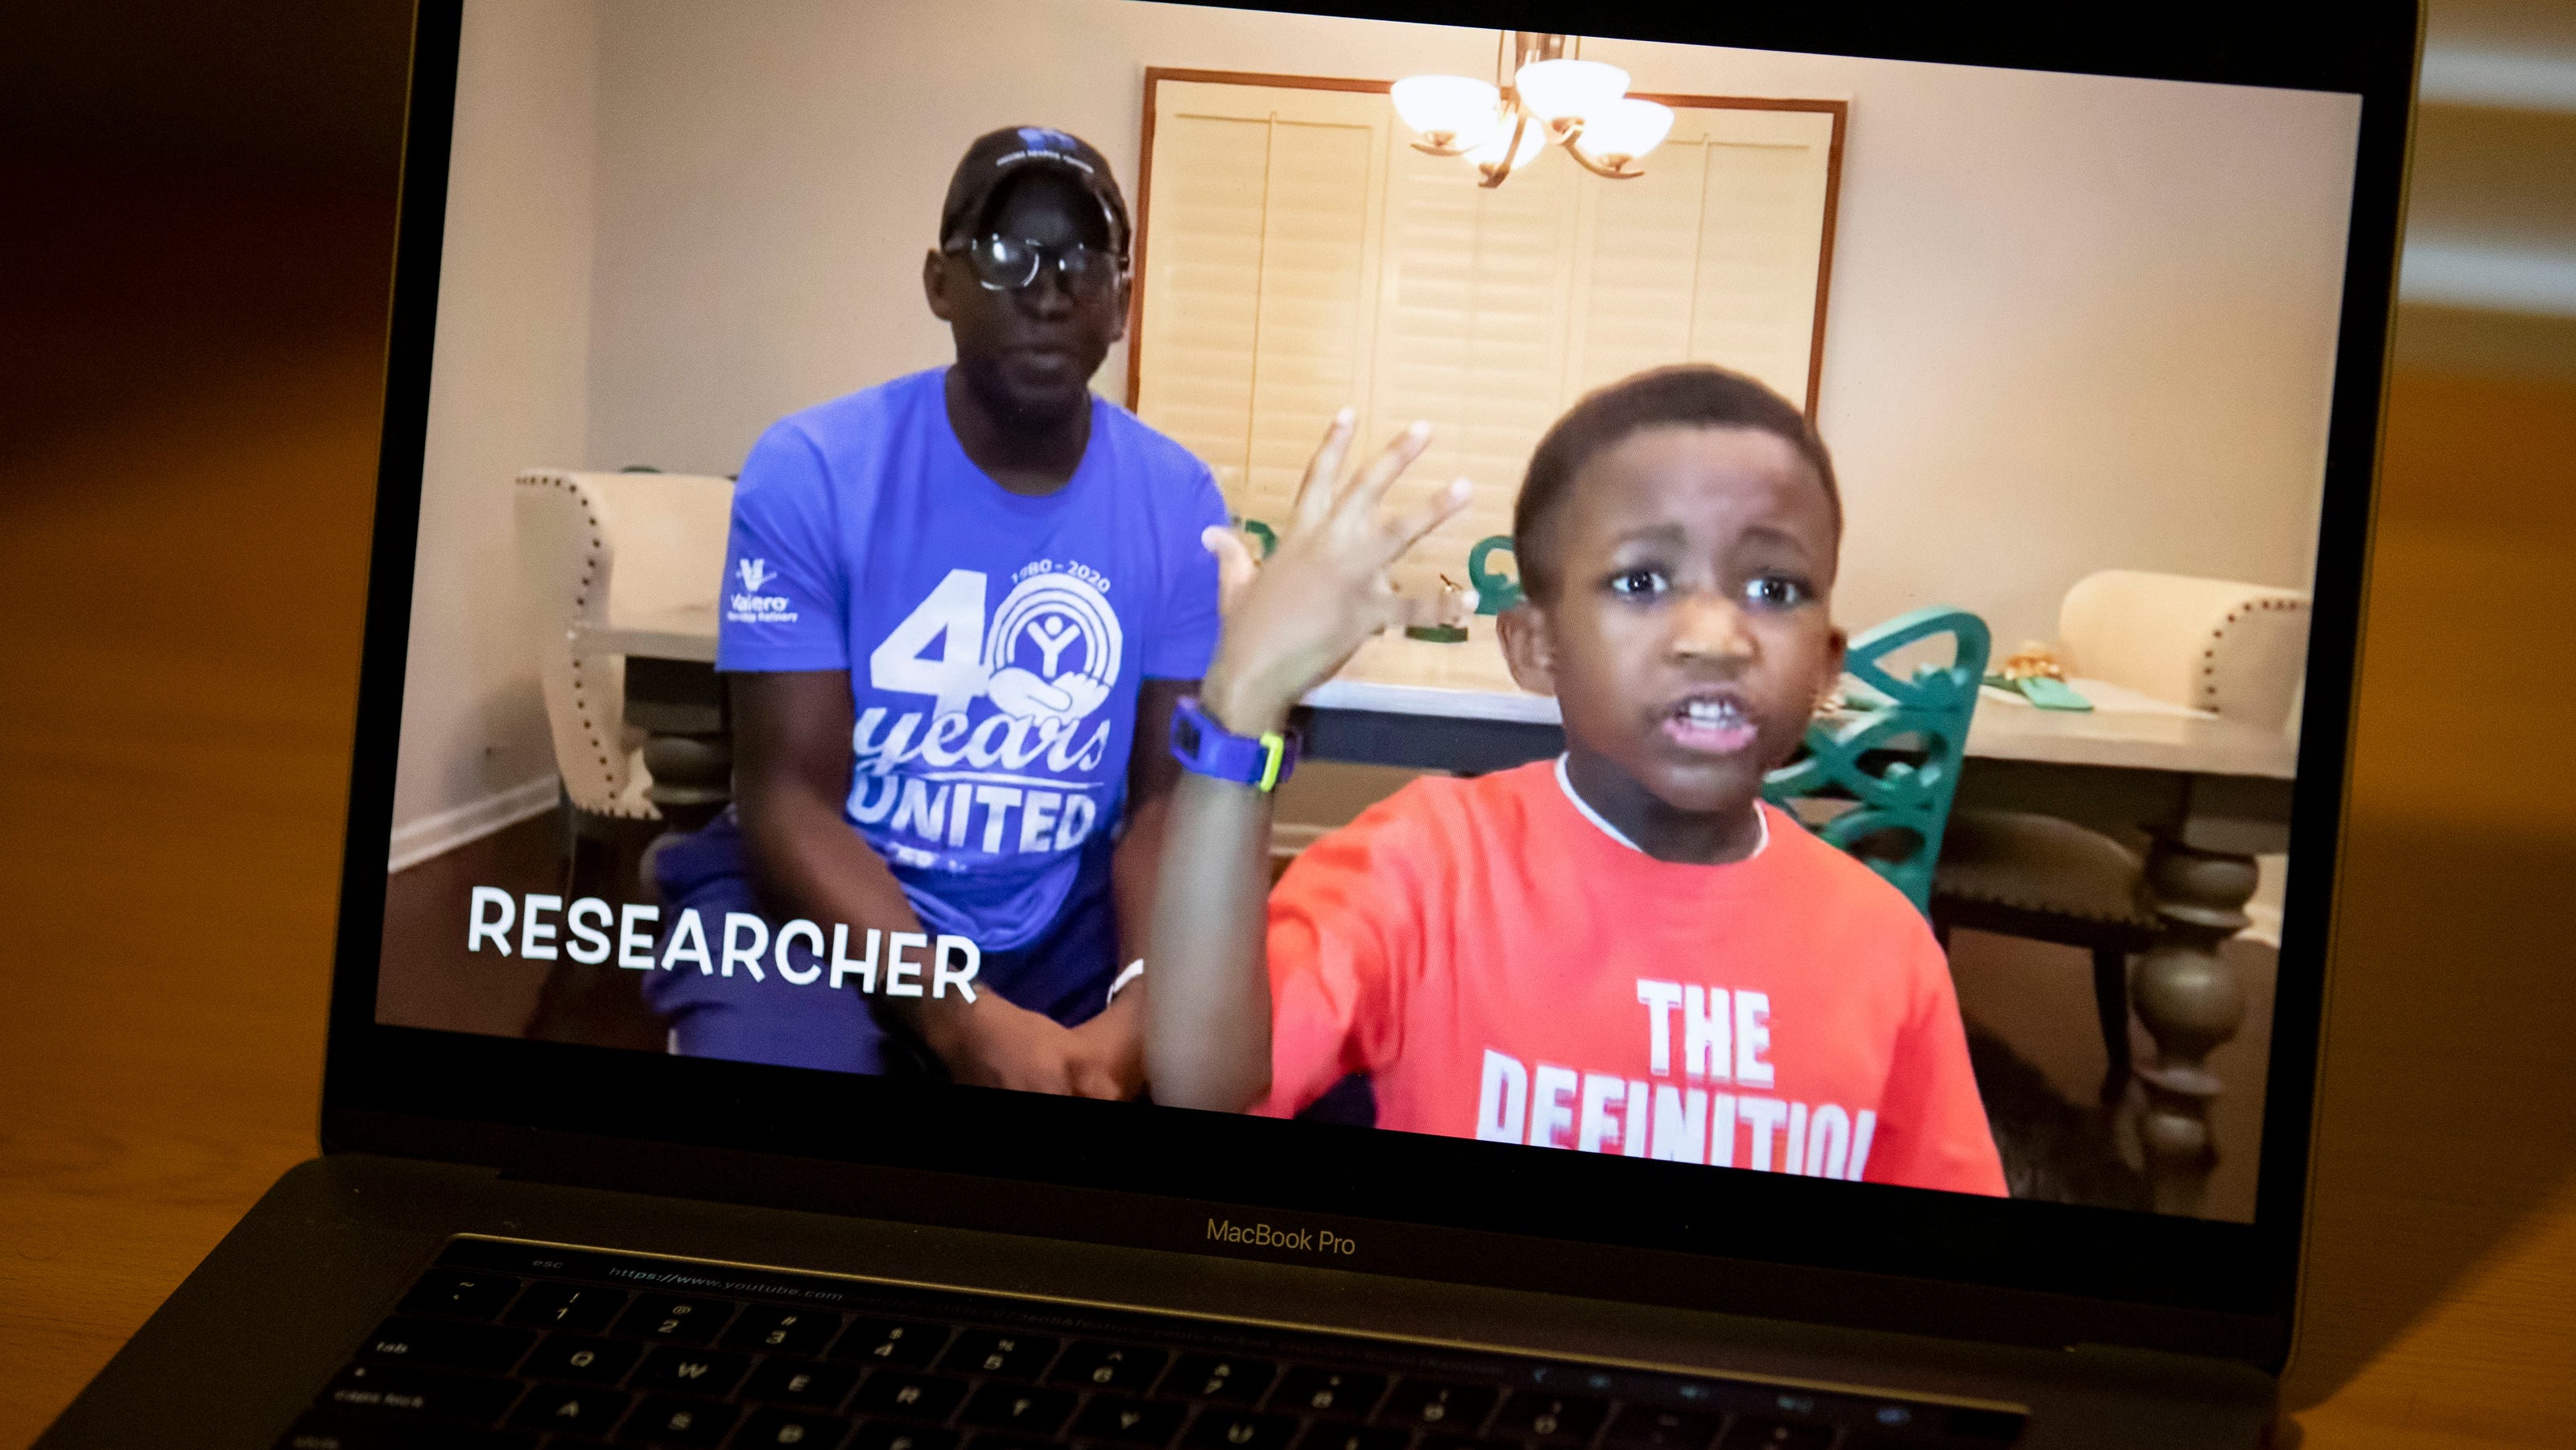 Sam White, Memphis 6-year-old who raps about careers returns to Ellen, announces book deal